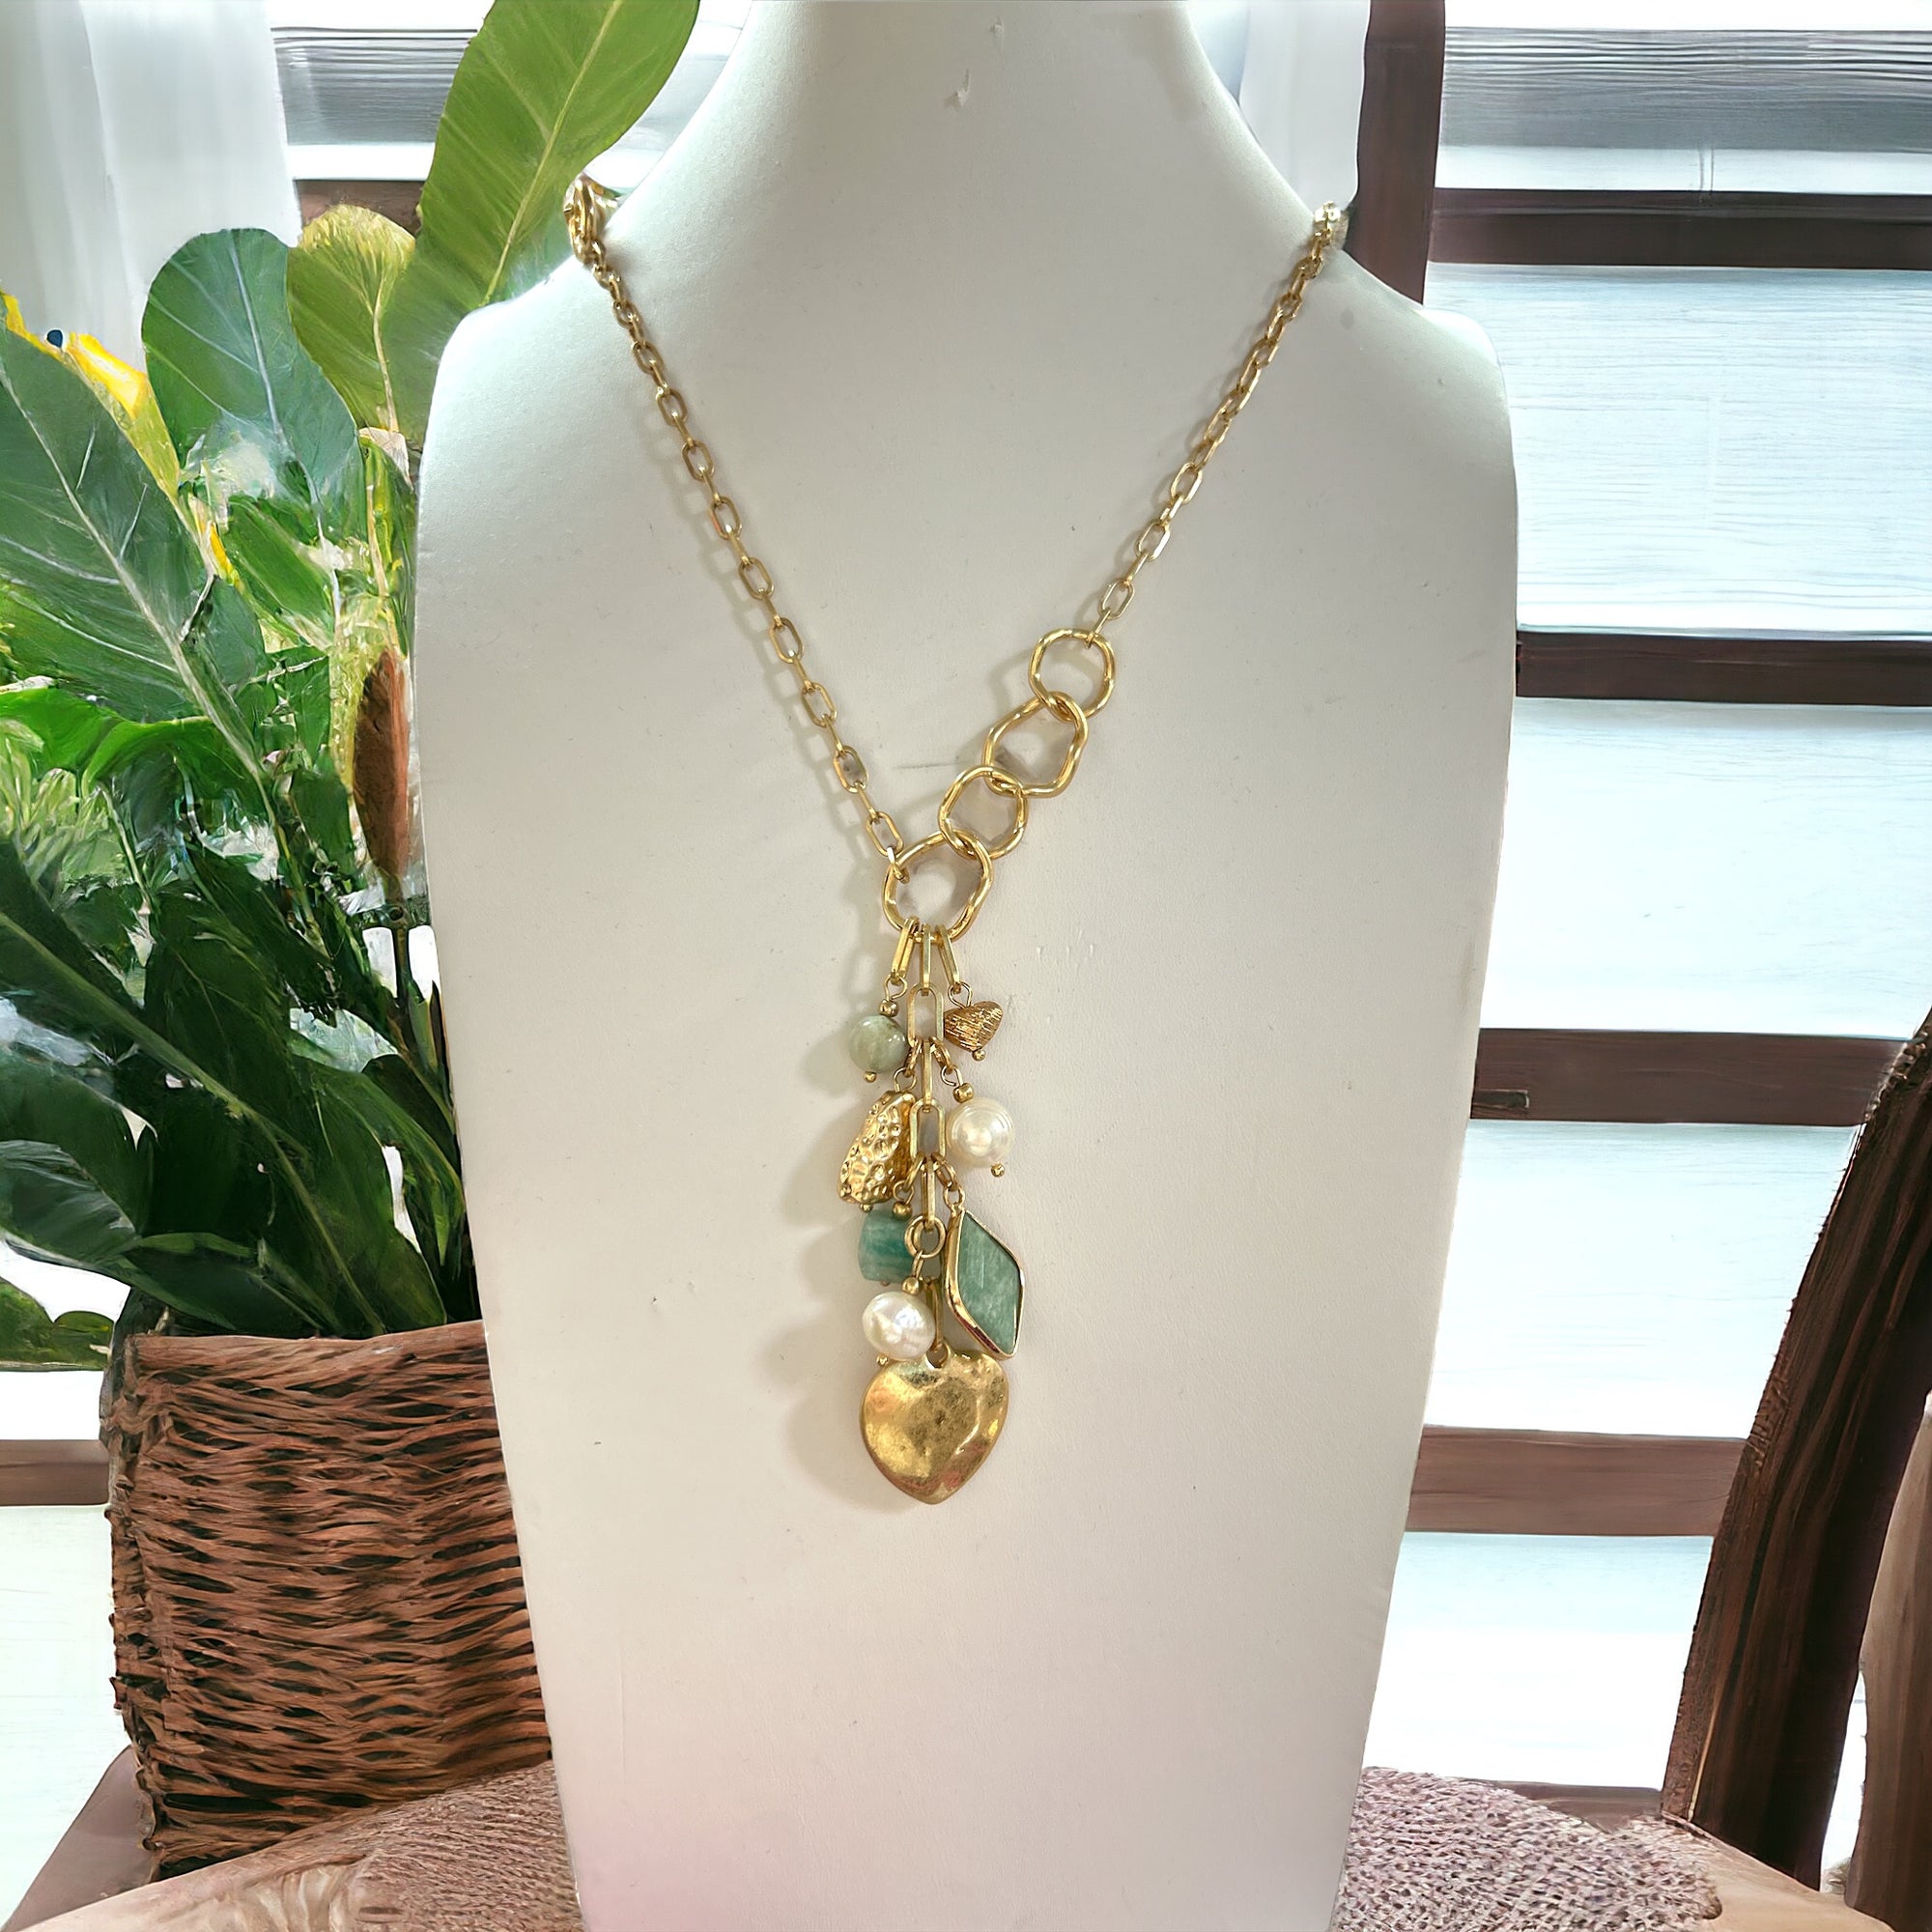 Gold Necklace with Charm Pendant Mint